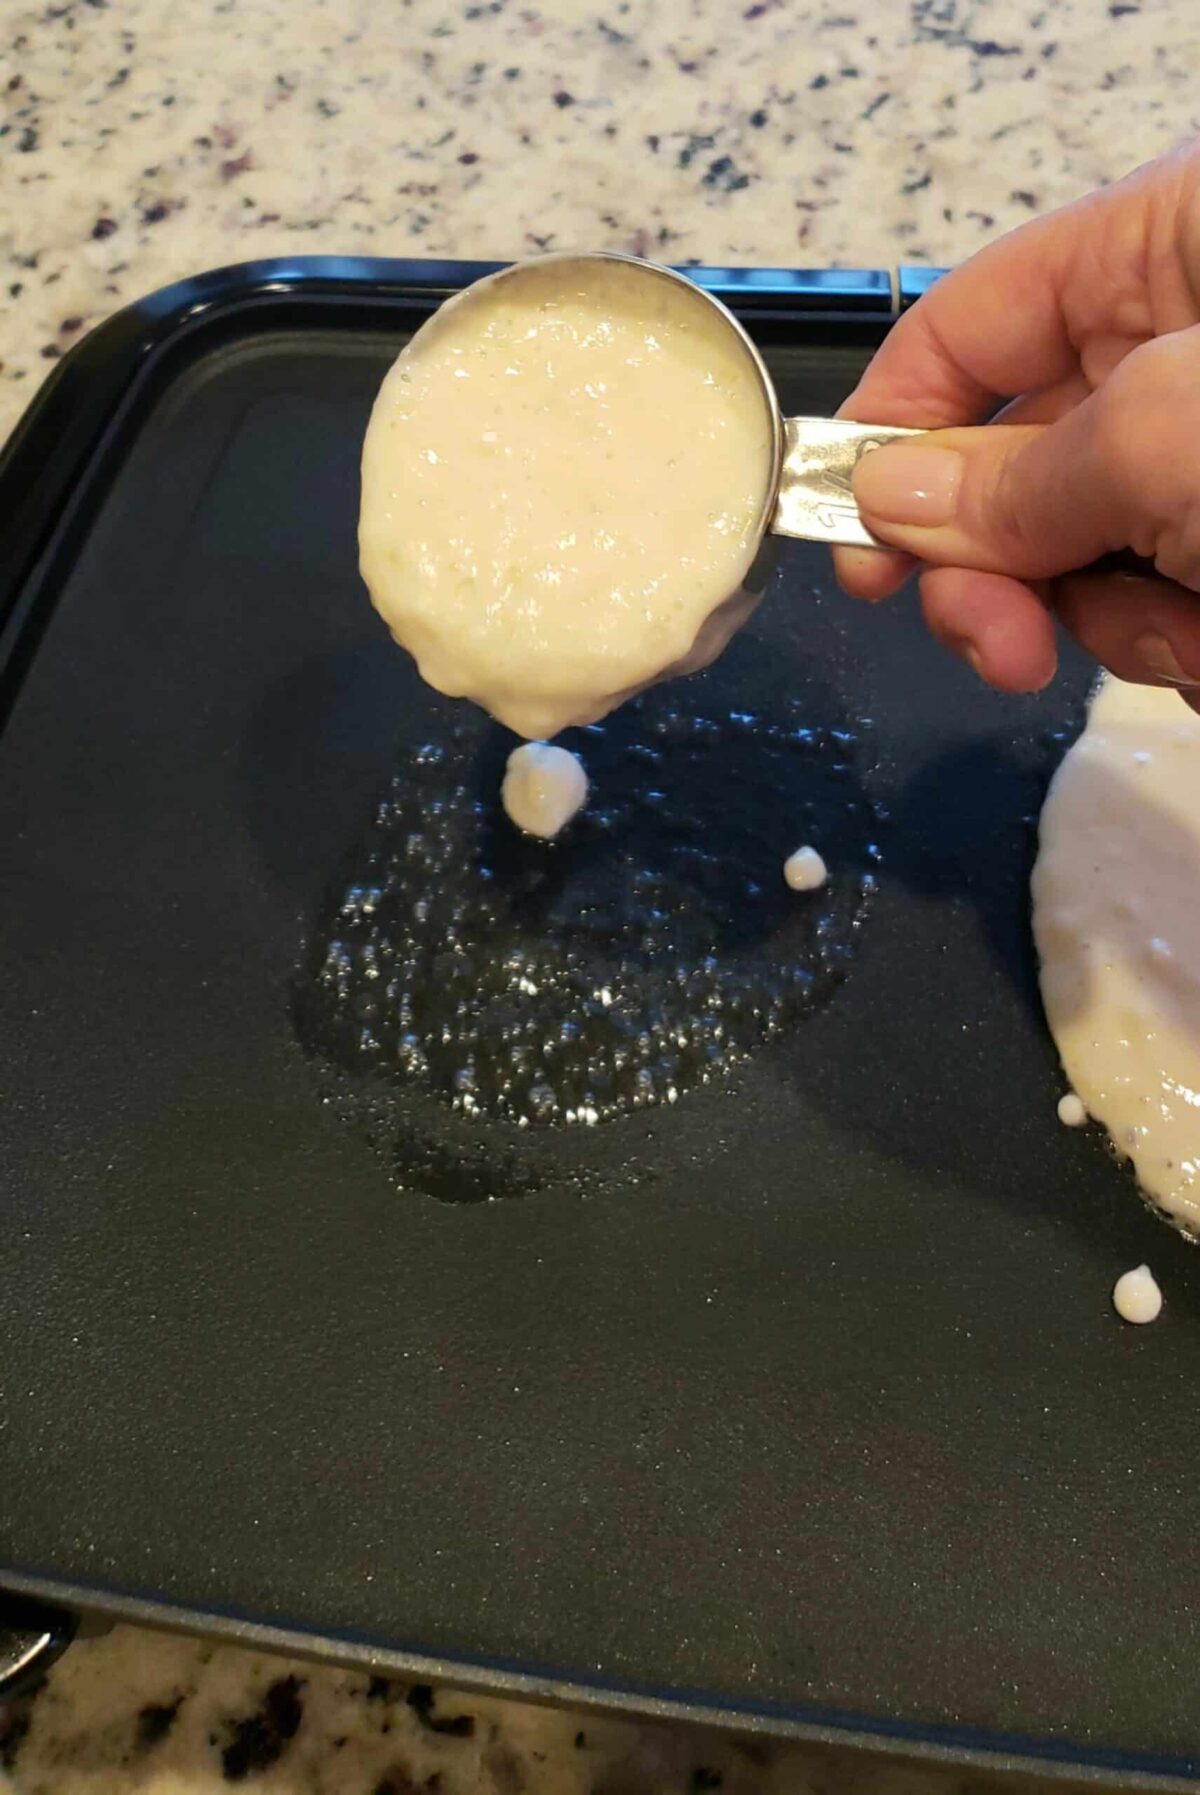 Pouring the pancake batter onto the griddle with a dry measuring cup is a great way to avoid dragging a spoon back and forth. That gets messy. This method makes sure they come out perfectly round-or closer to it!